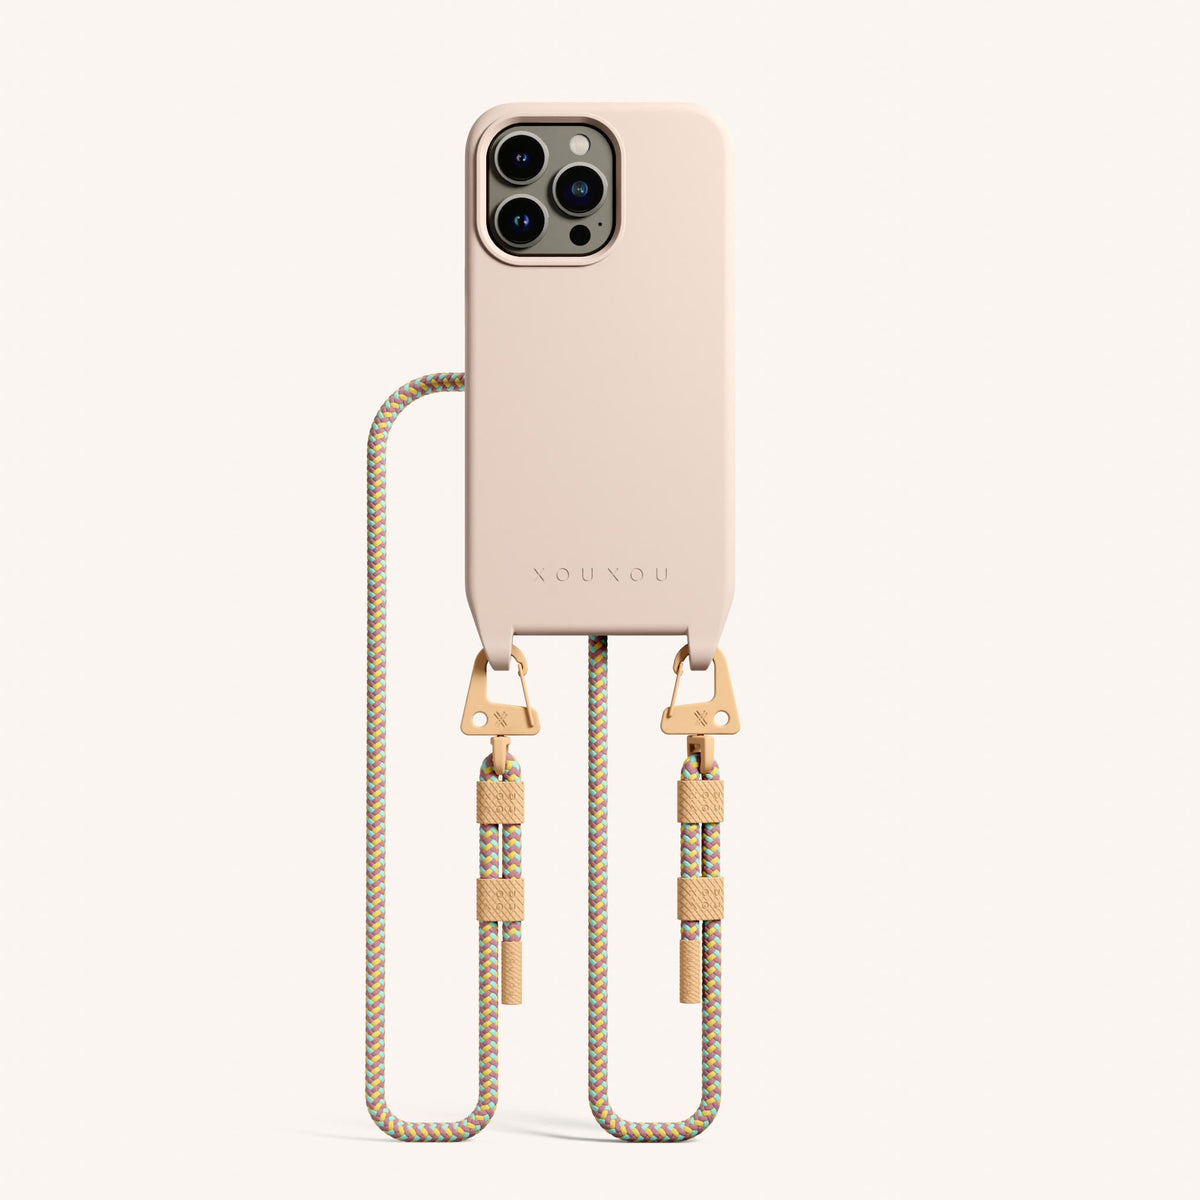 Phone Necklace with Carabiner Rope for iPhone 13 Pro with MagSafe in Powder Pink + Palm Springs Total View | XOUXOU #phone model_iphone 13 pro